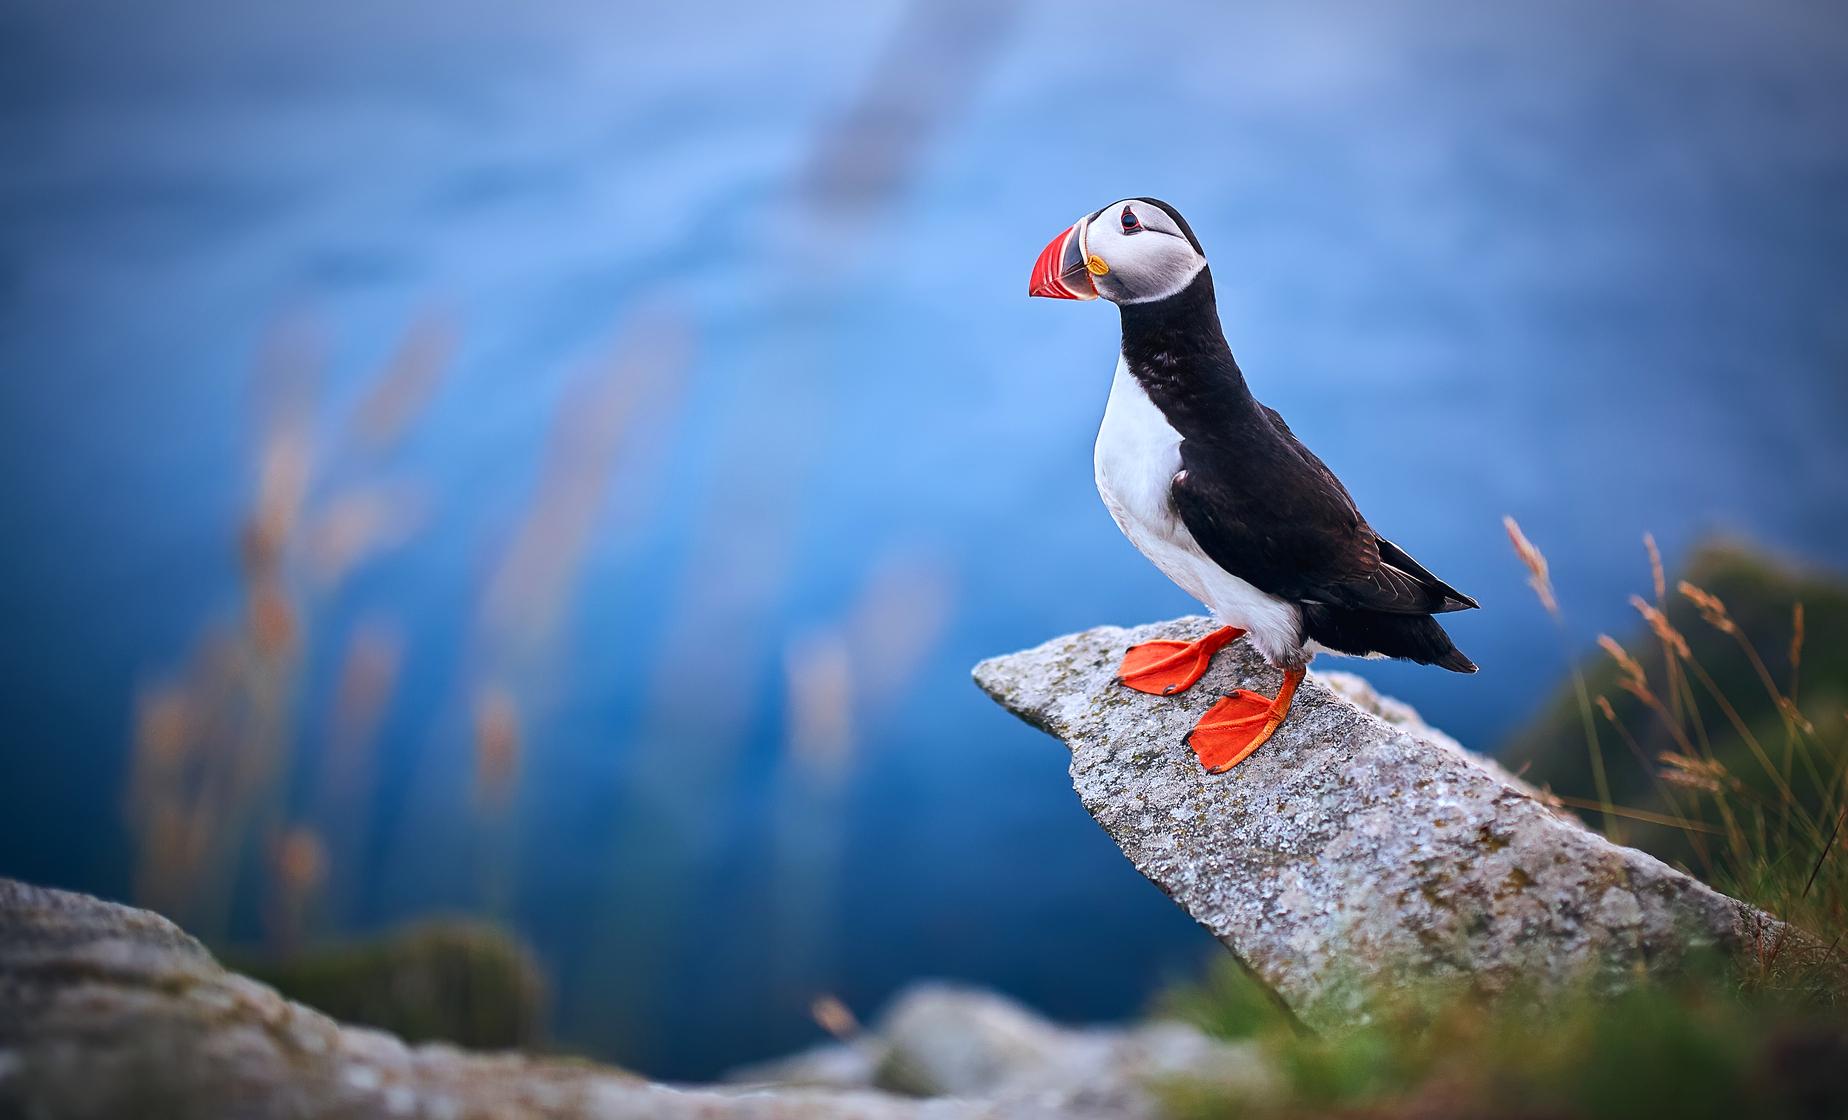 Getting 'Puffed' up about Puffins – Cruise Traveller